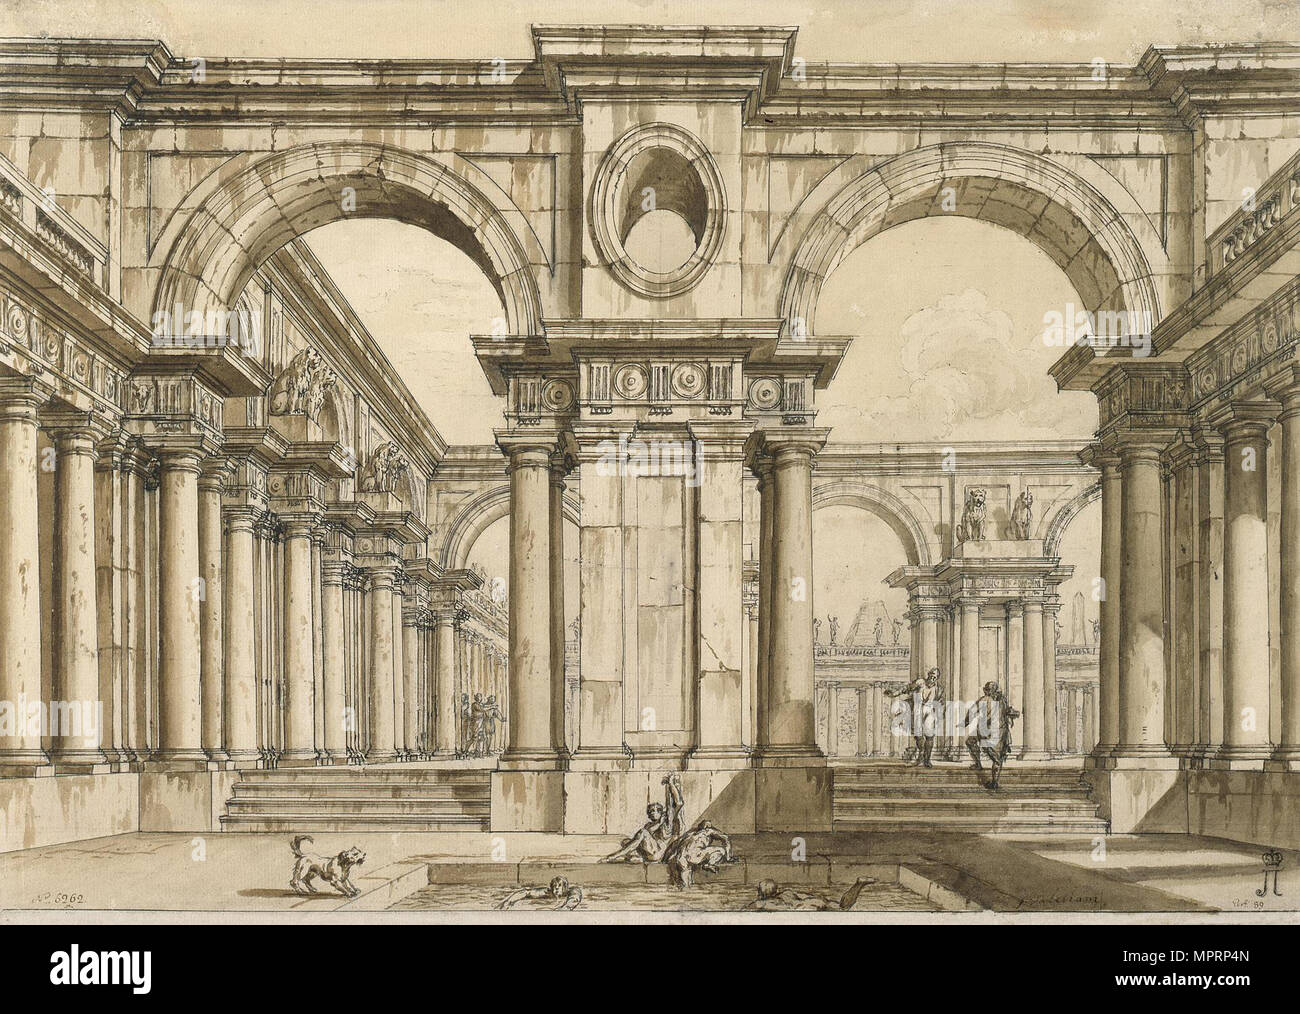 Set design for the Opera La clemenza di Tito (The Clemency of Titus) by Wolfgang Amadeus Mozart, 18t Stock Photo